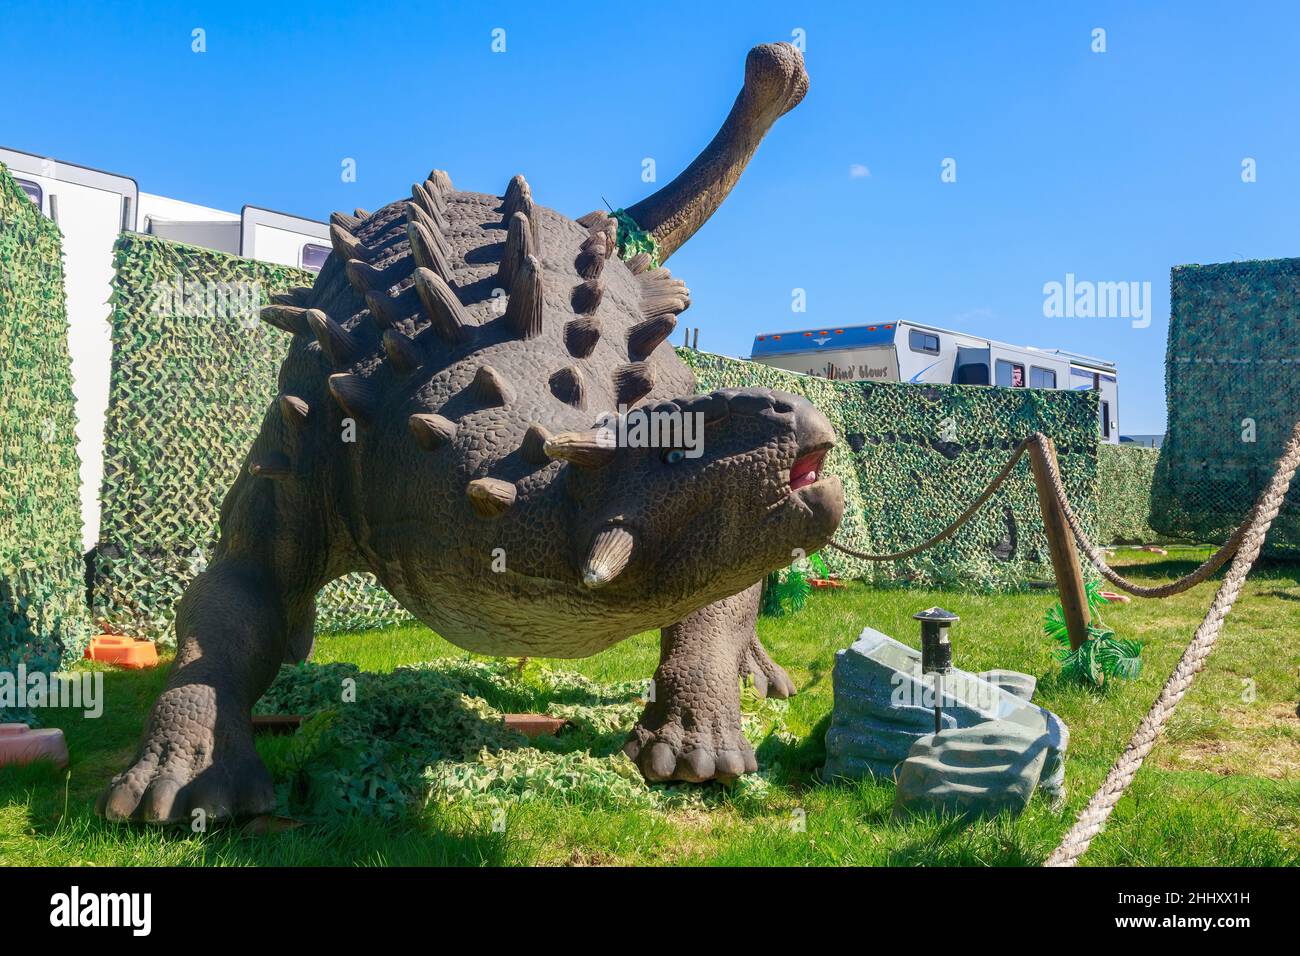 A sculpture of the armored plant-eating dinosaur Ankylosaurus, photographed at a traveling dinosaur show Stock Photo